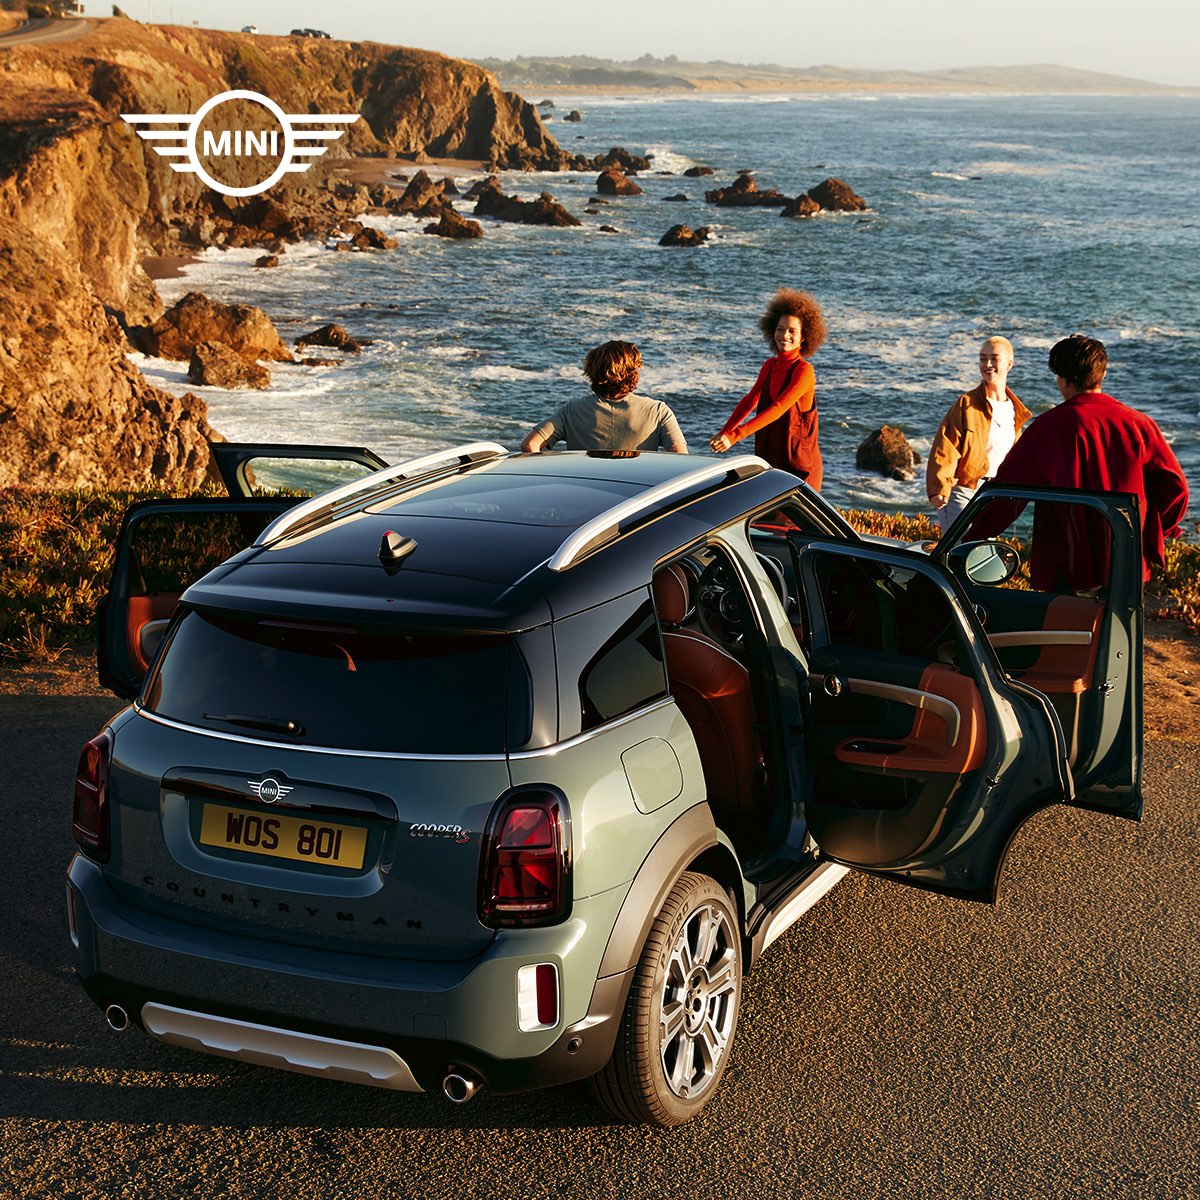 READY TO SHARE THE MINI MOMENTS?